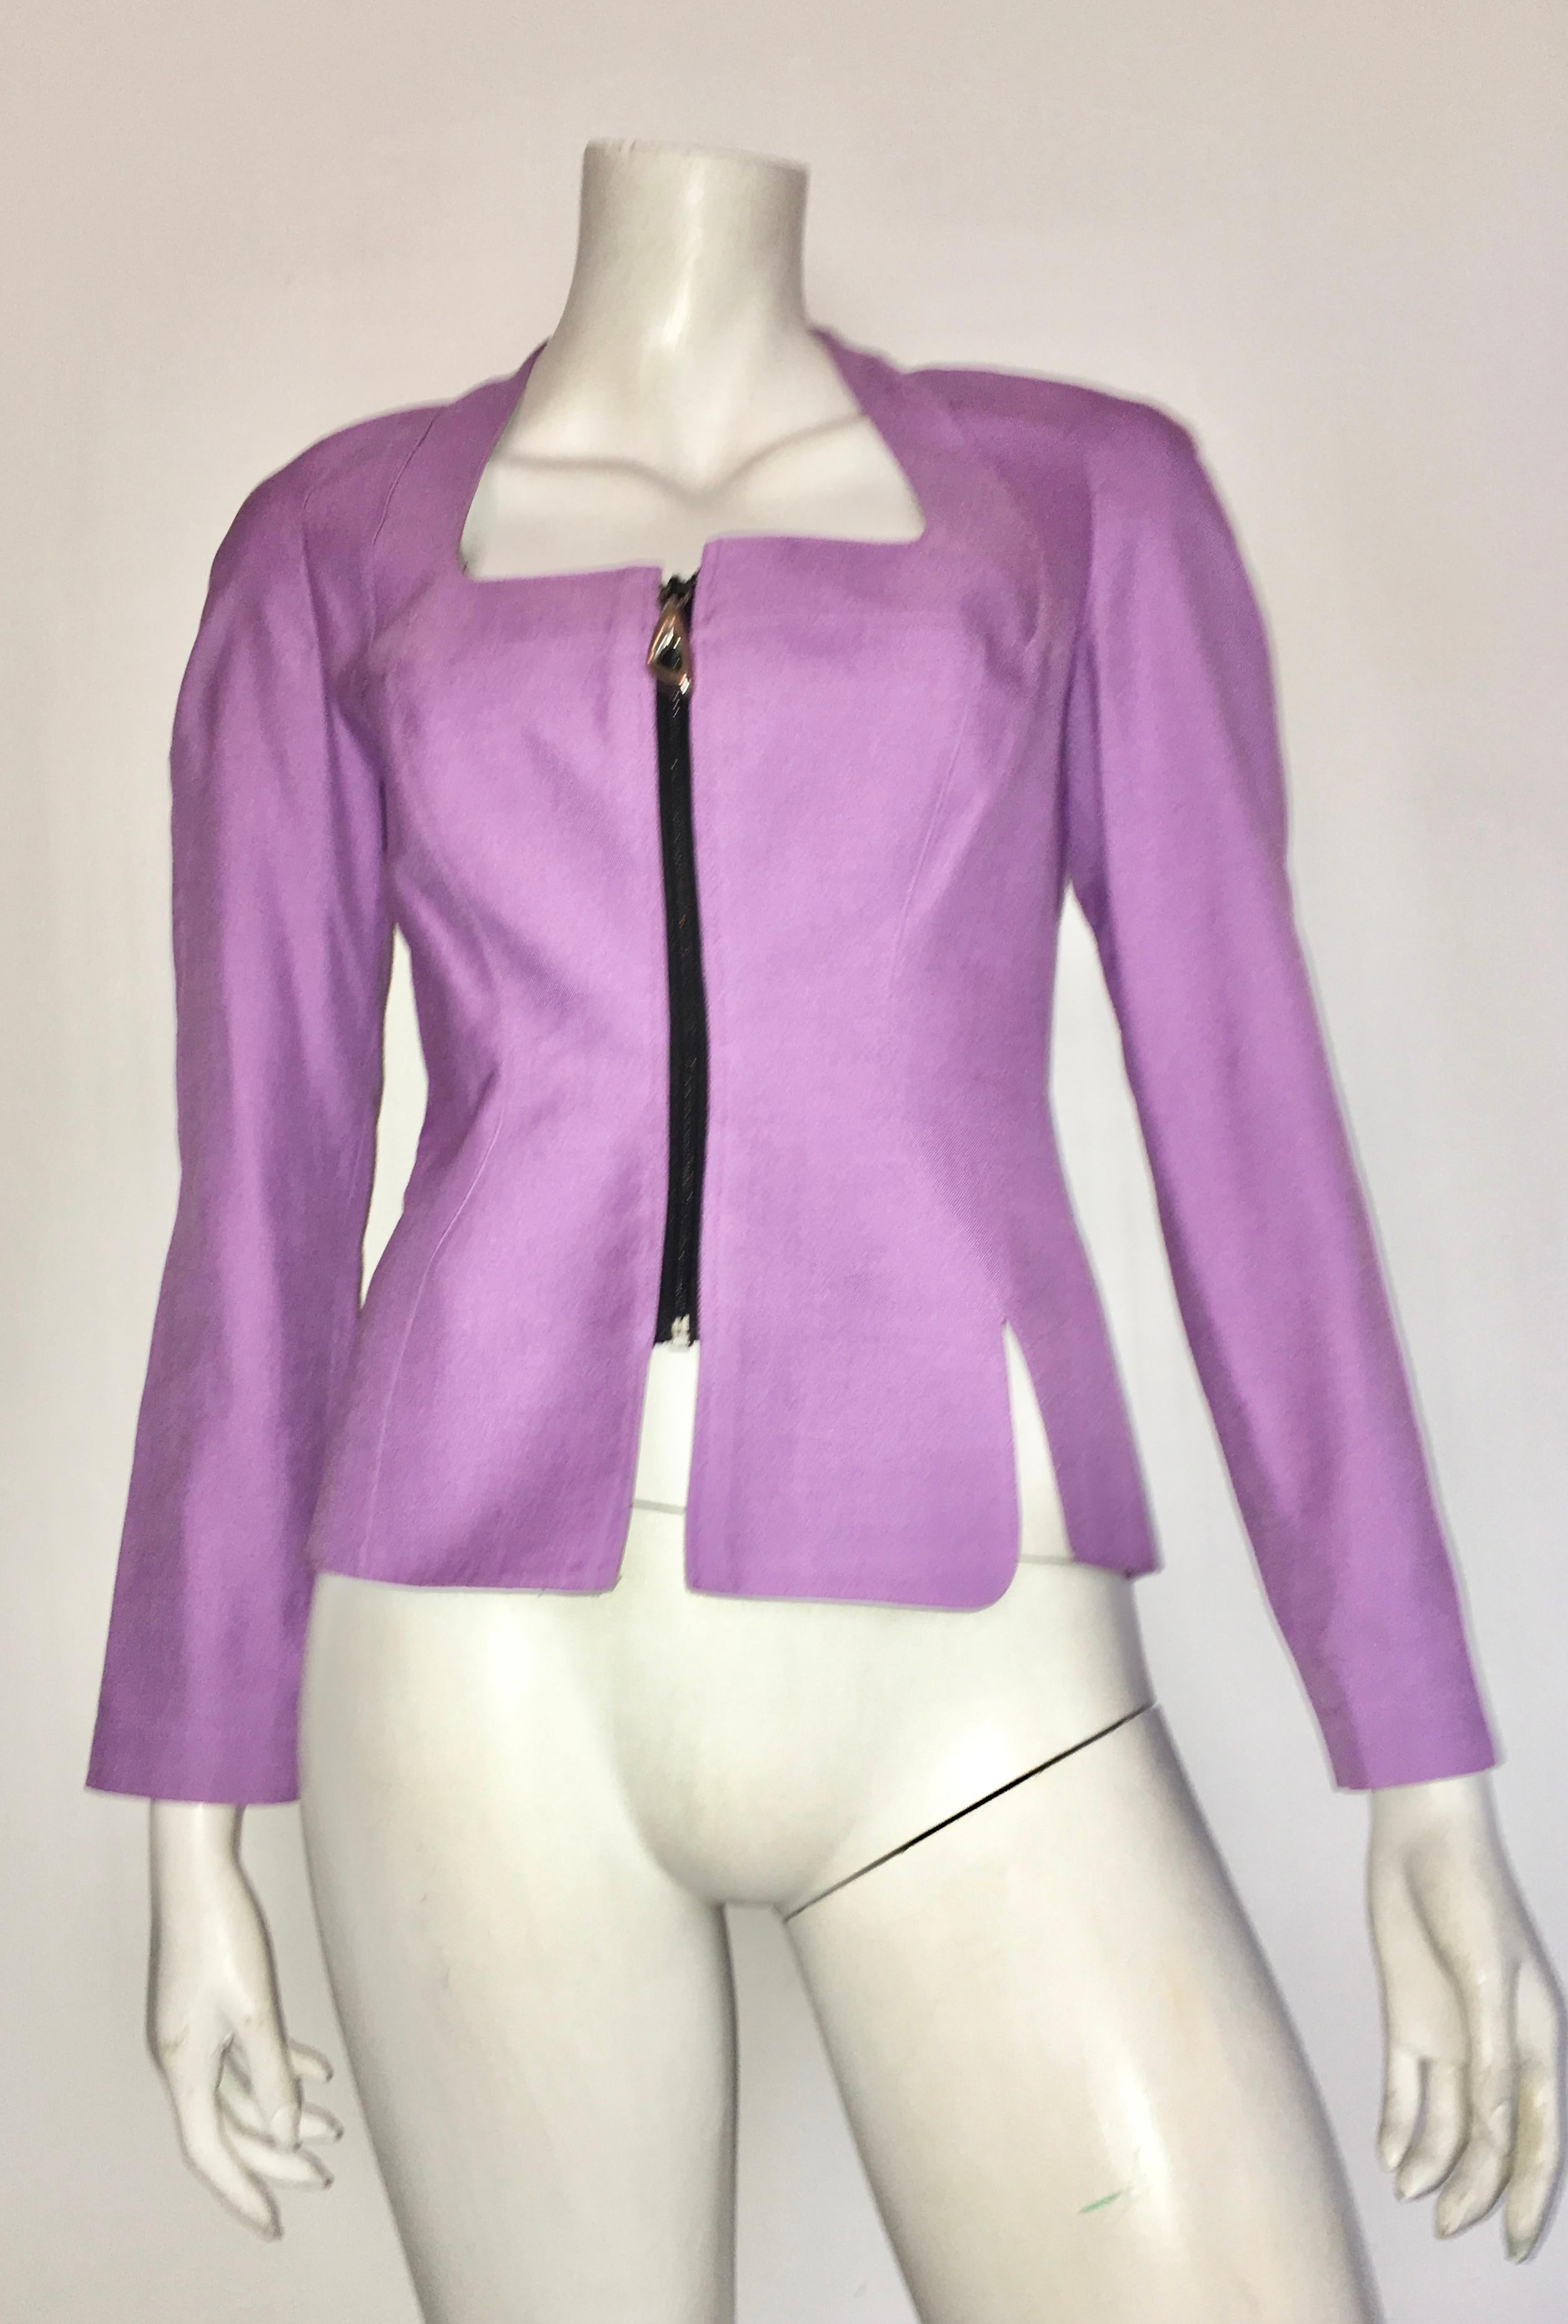 Thierry Mugler 1990s Lilac Linen Jacket & Skirt set Size 4.  For Sale 10